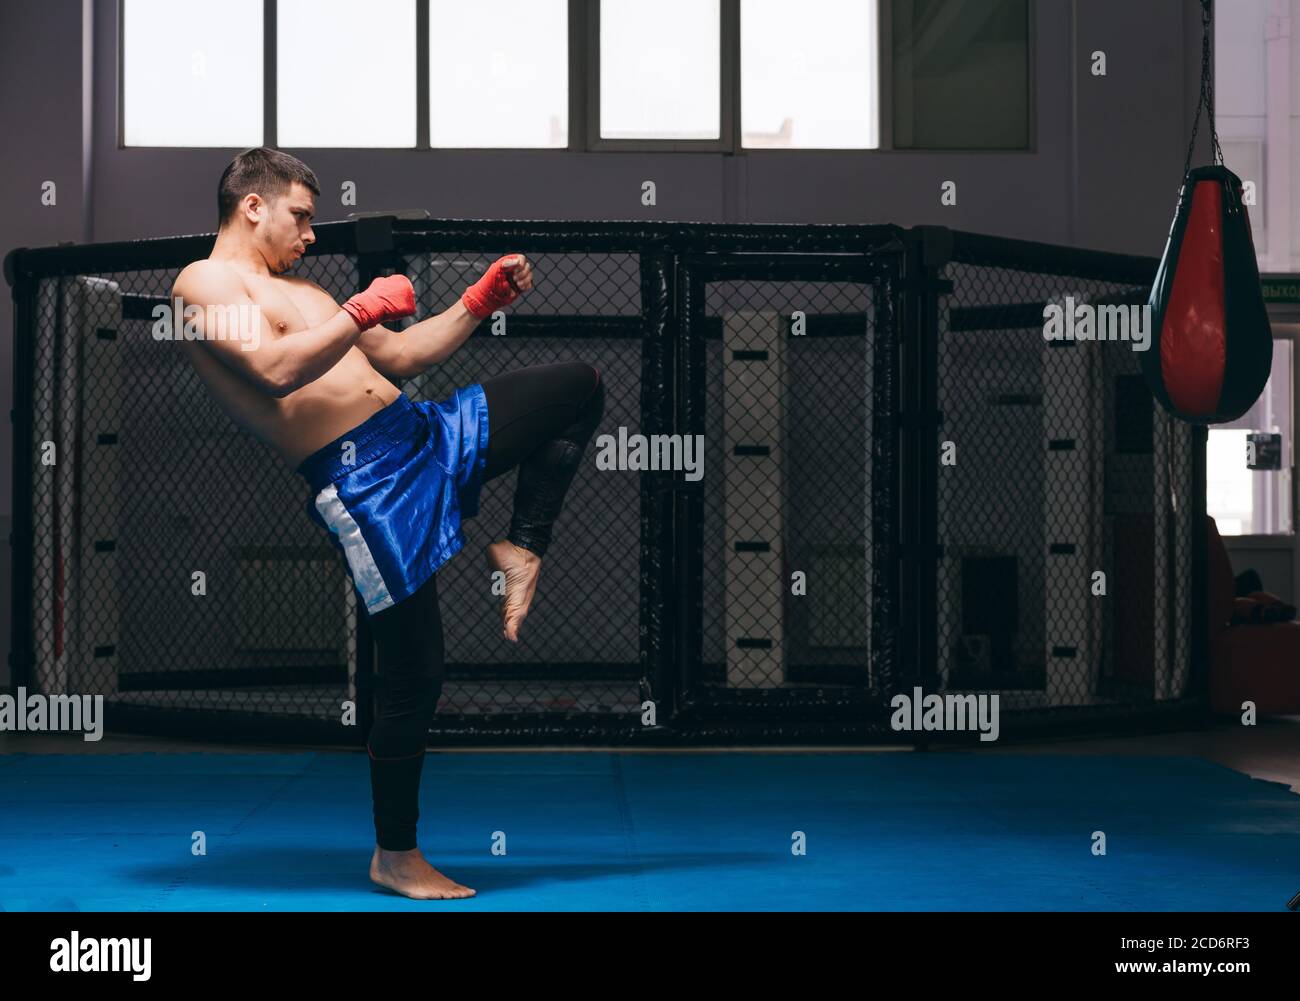 Young athletic man preparing for kickboxing competitions, warming up in gym making kicks with leg during workout Stock Photo